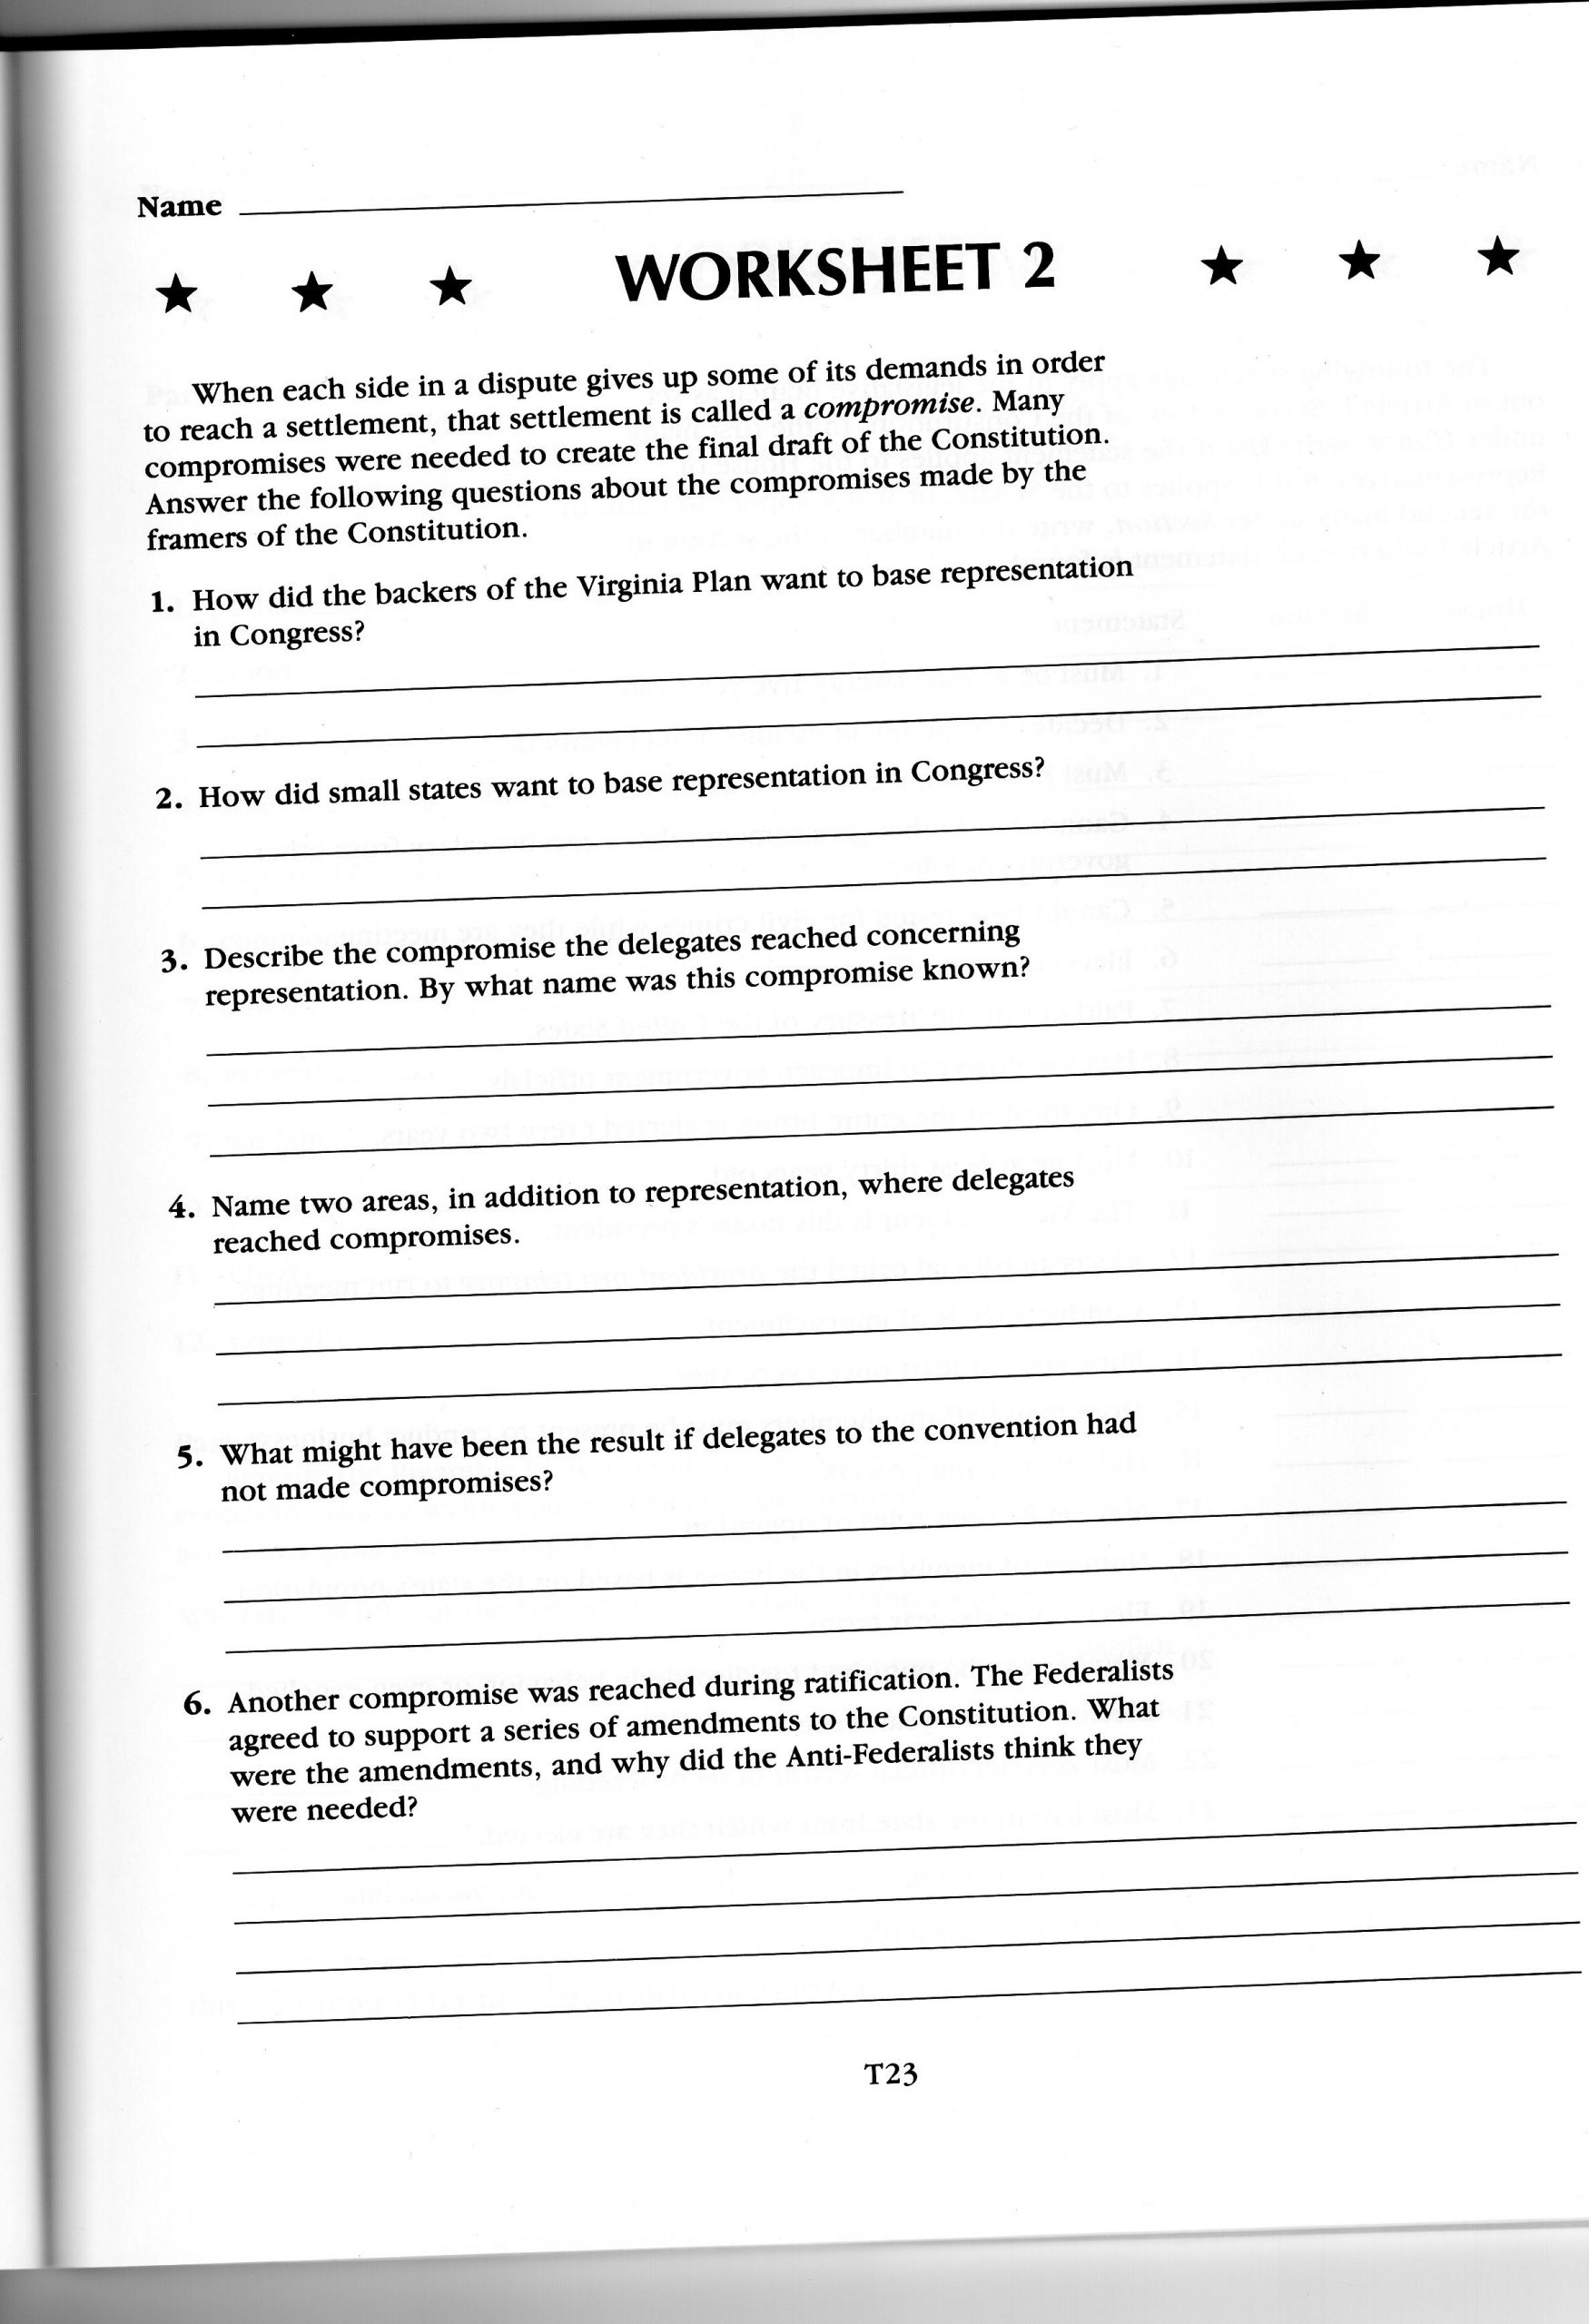 Articles Of Confederation Worksheet Answers Foundations Ms Hawkins social Stu S